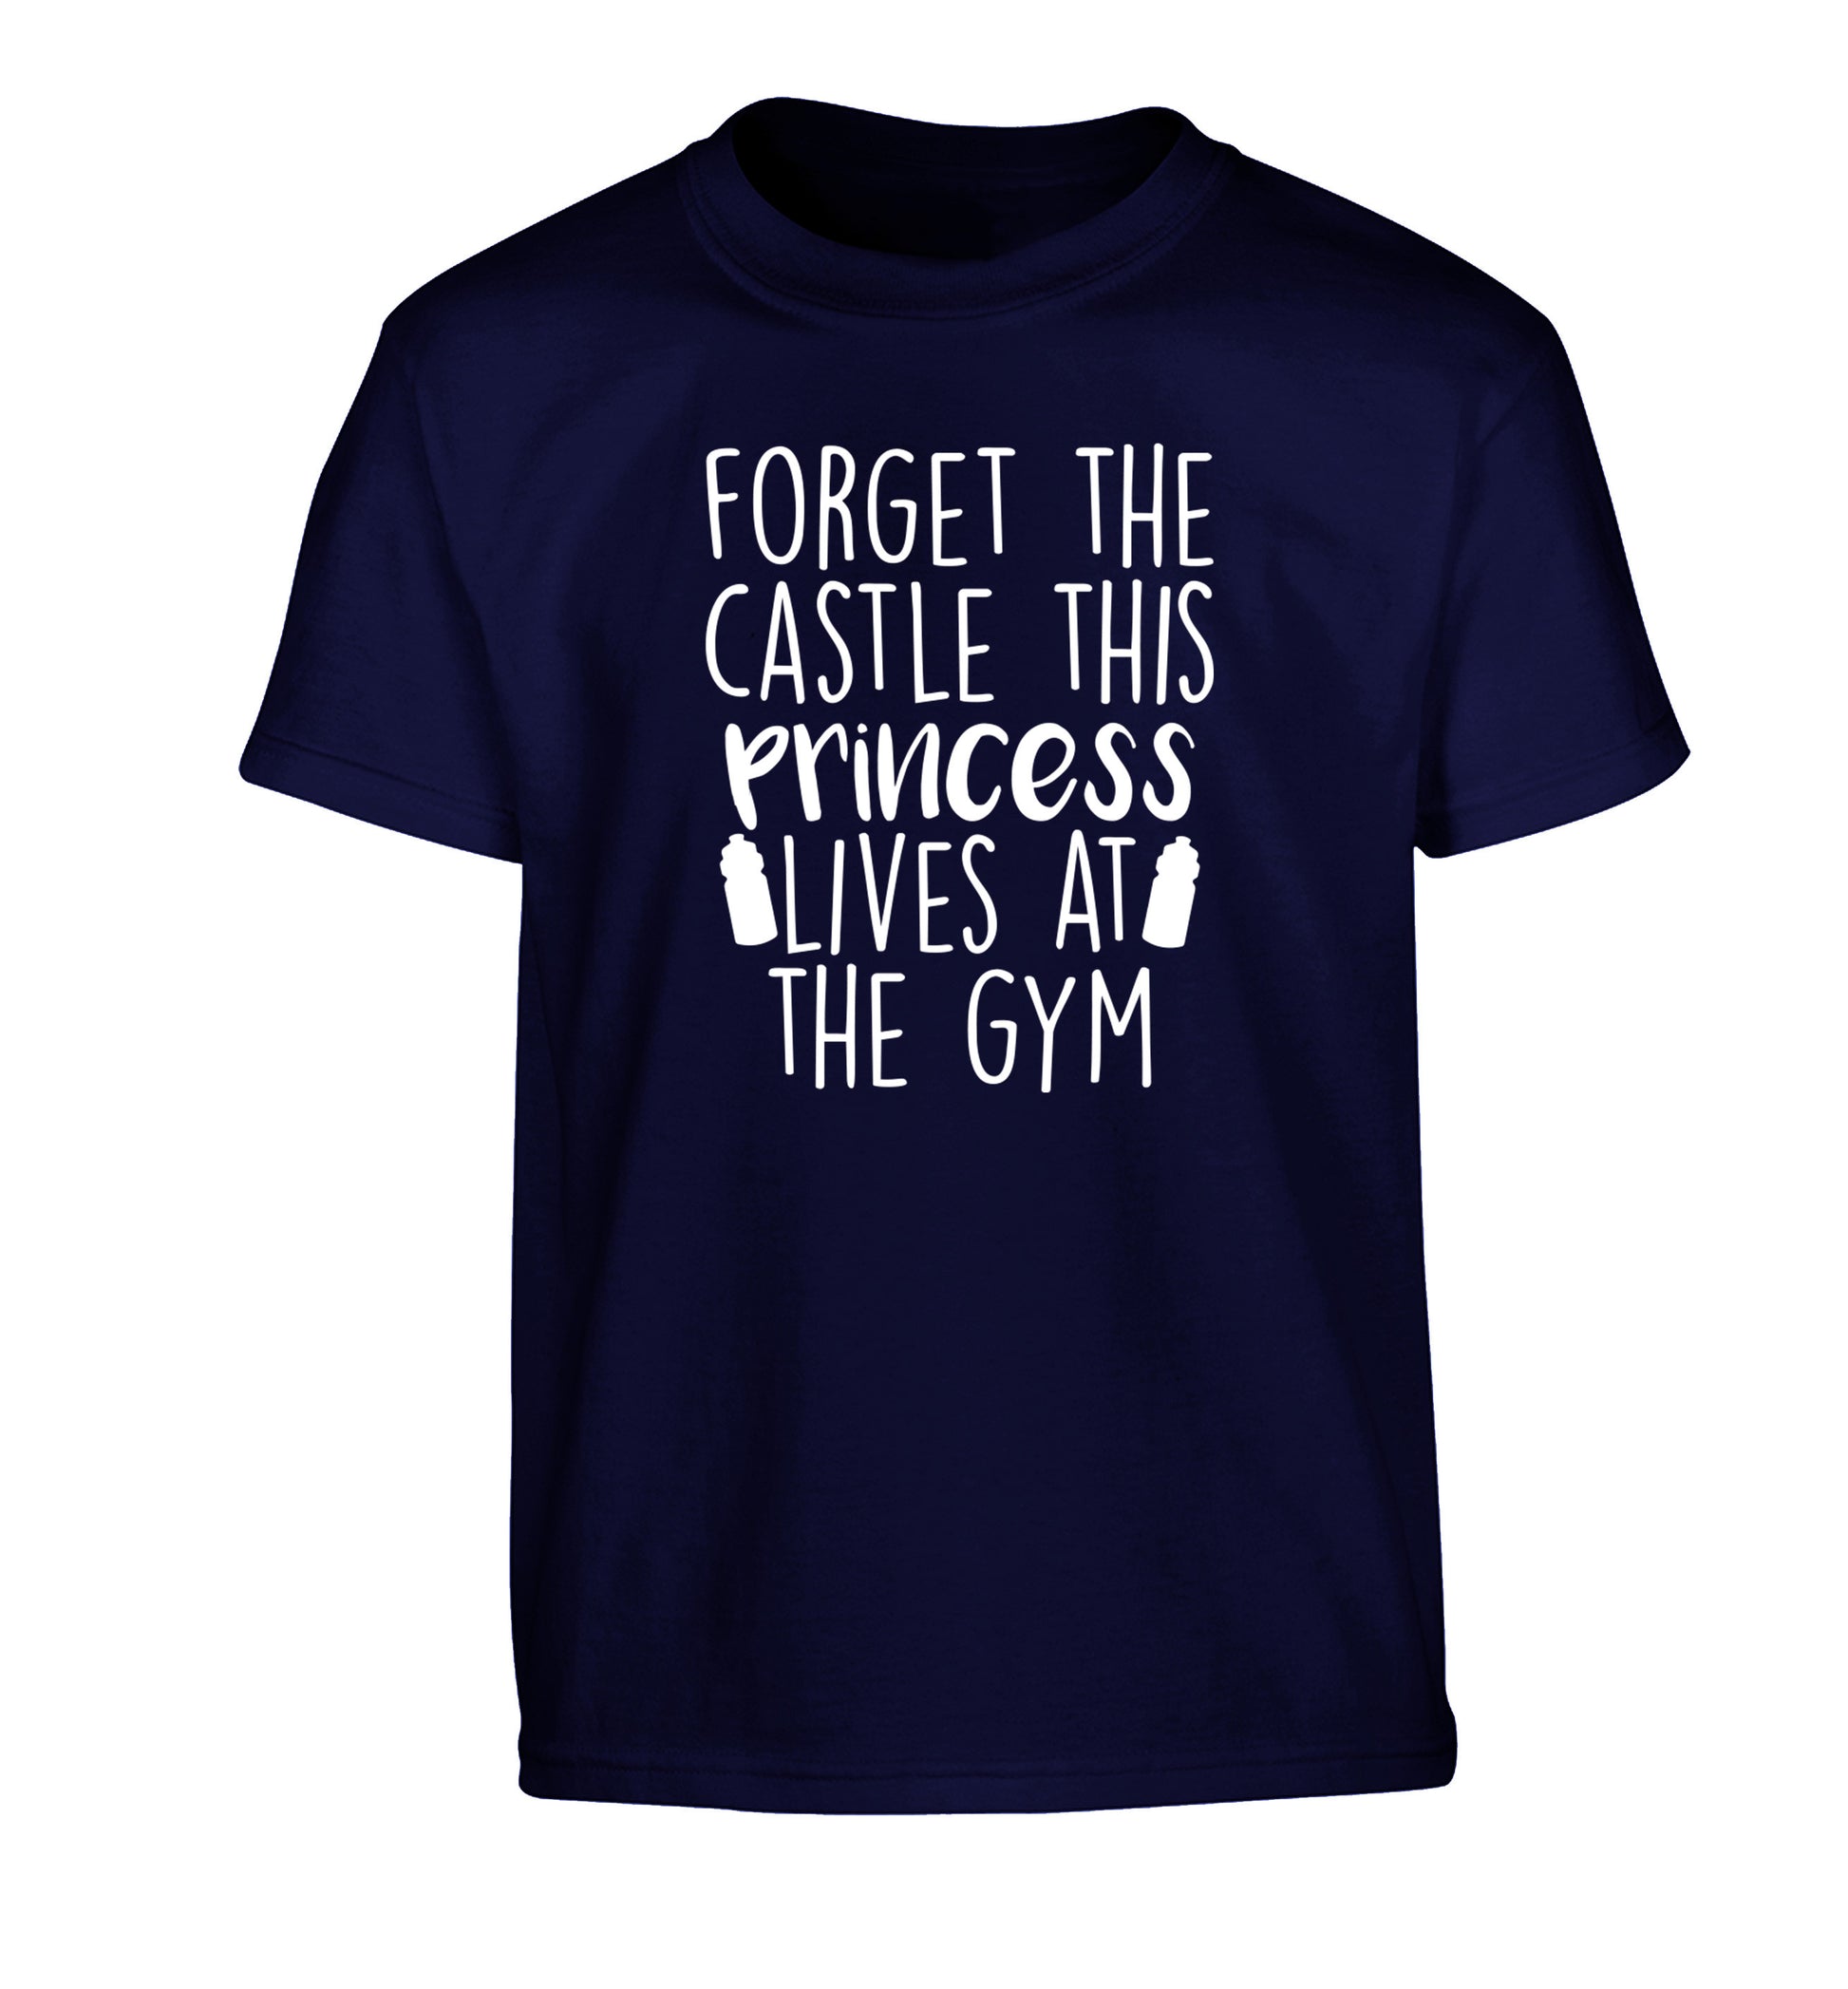 Forget the castle this princess lives at the gym Children's navy Tshirt 12-14 Years